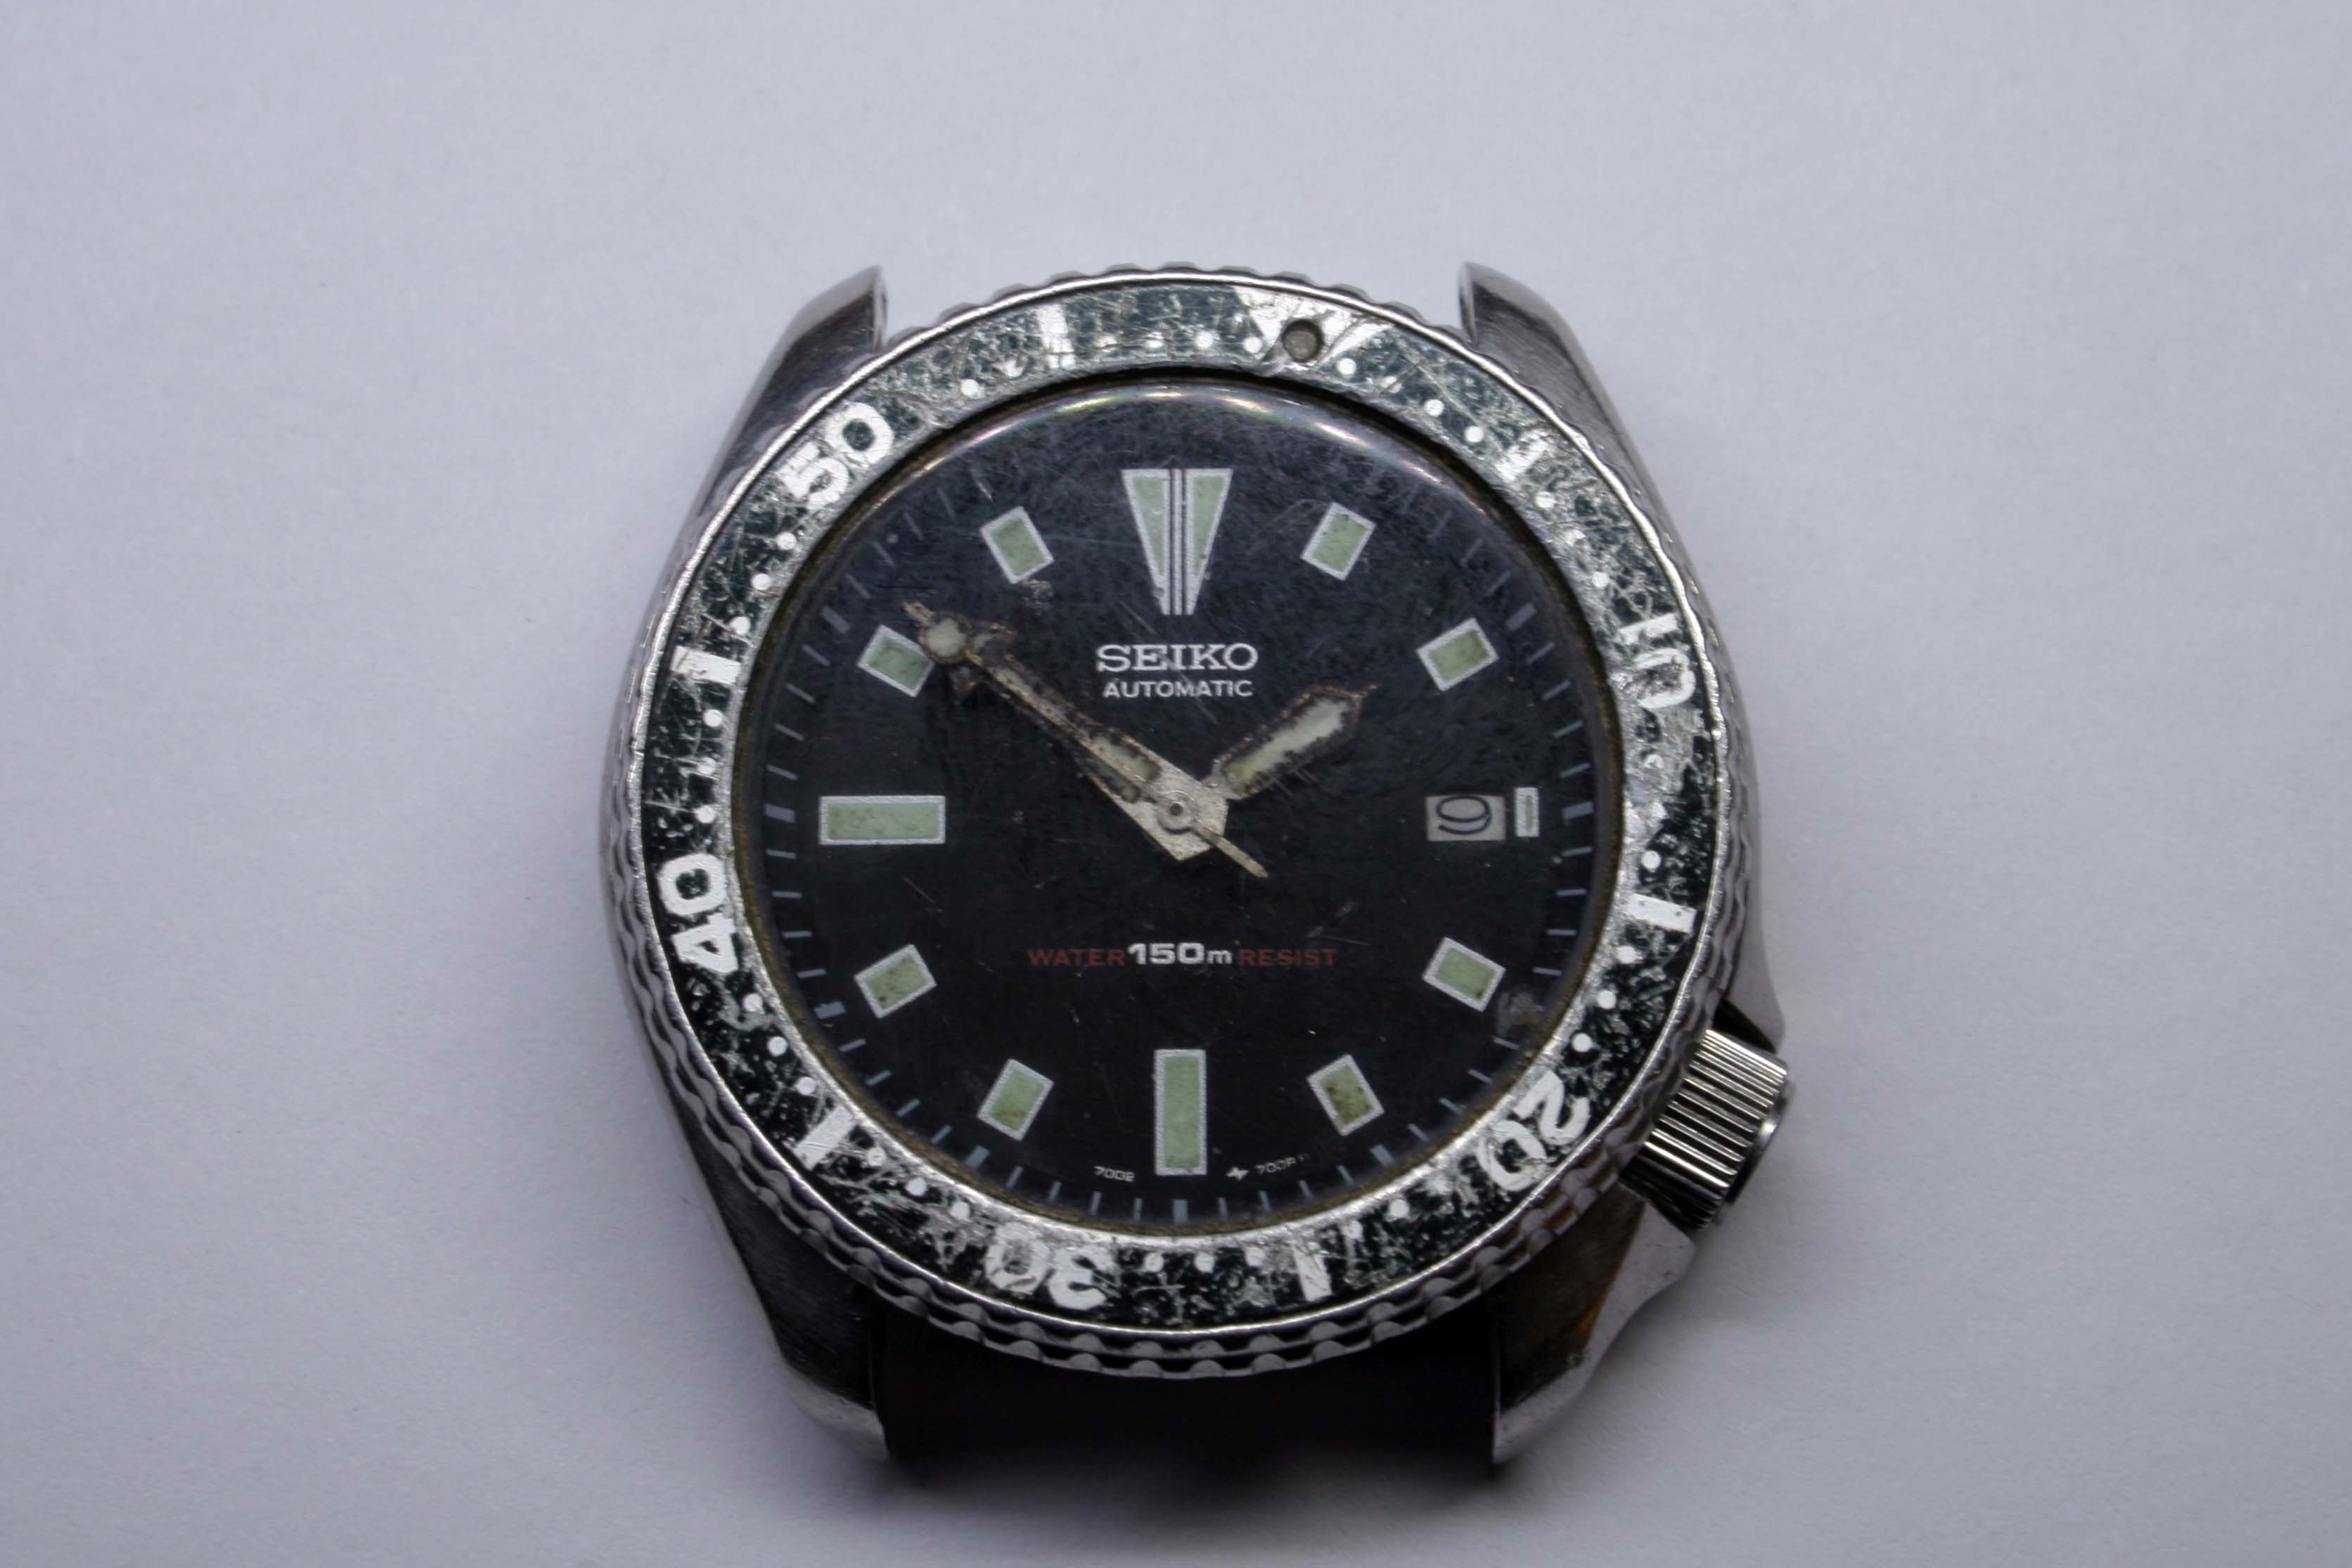 A Couple of 7002 Seiko Chat About Watches & The Industry Here - Watch Repair Talk